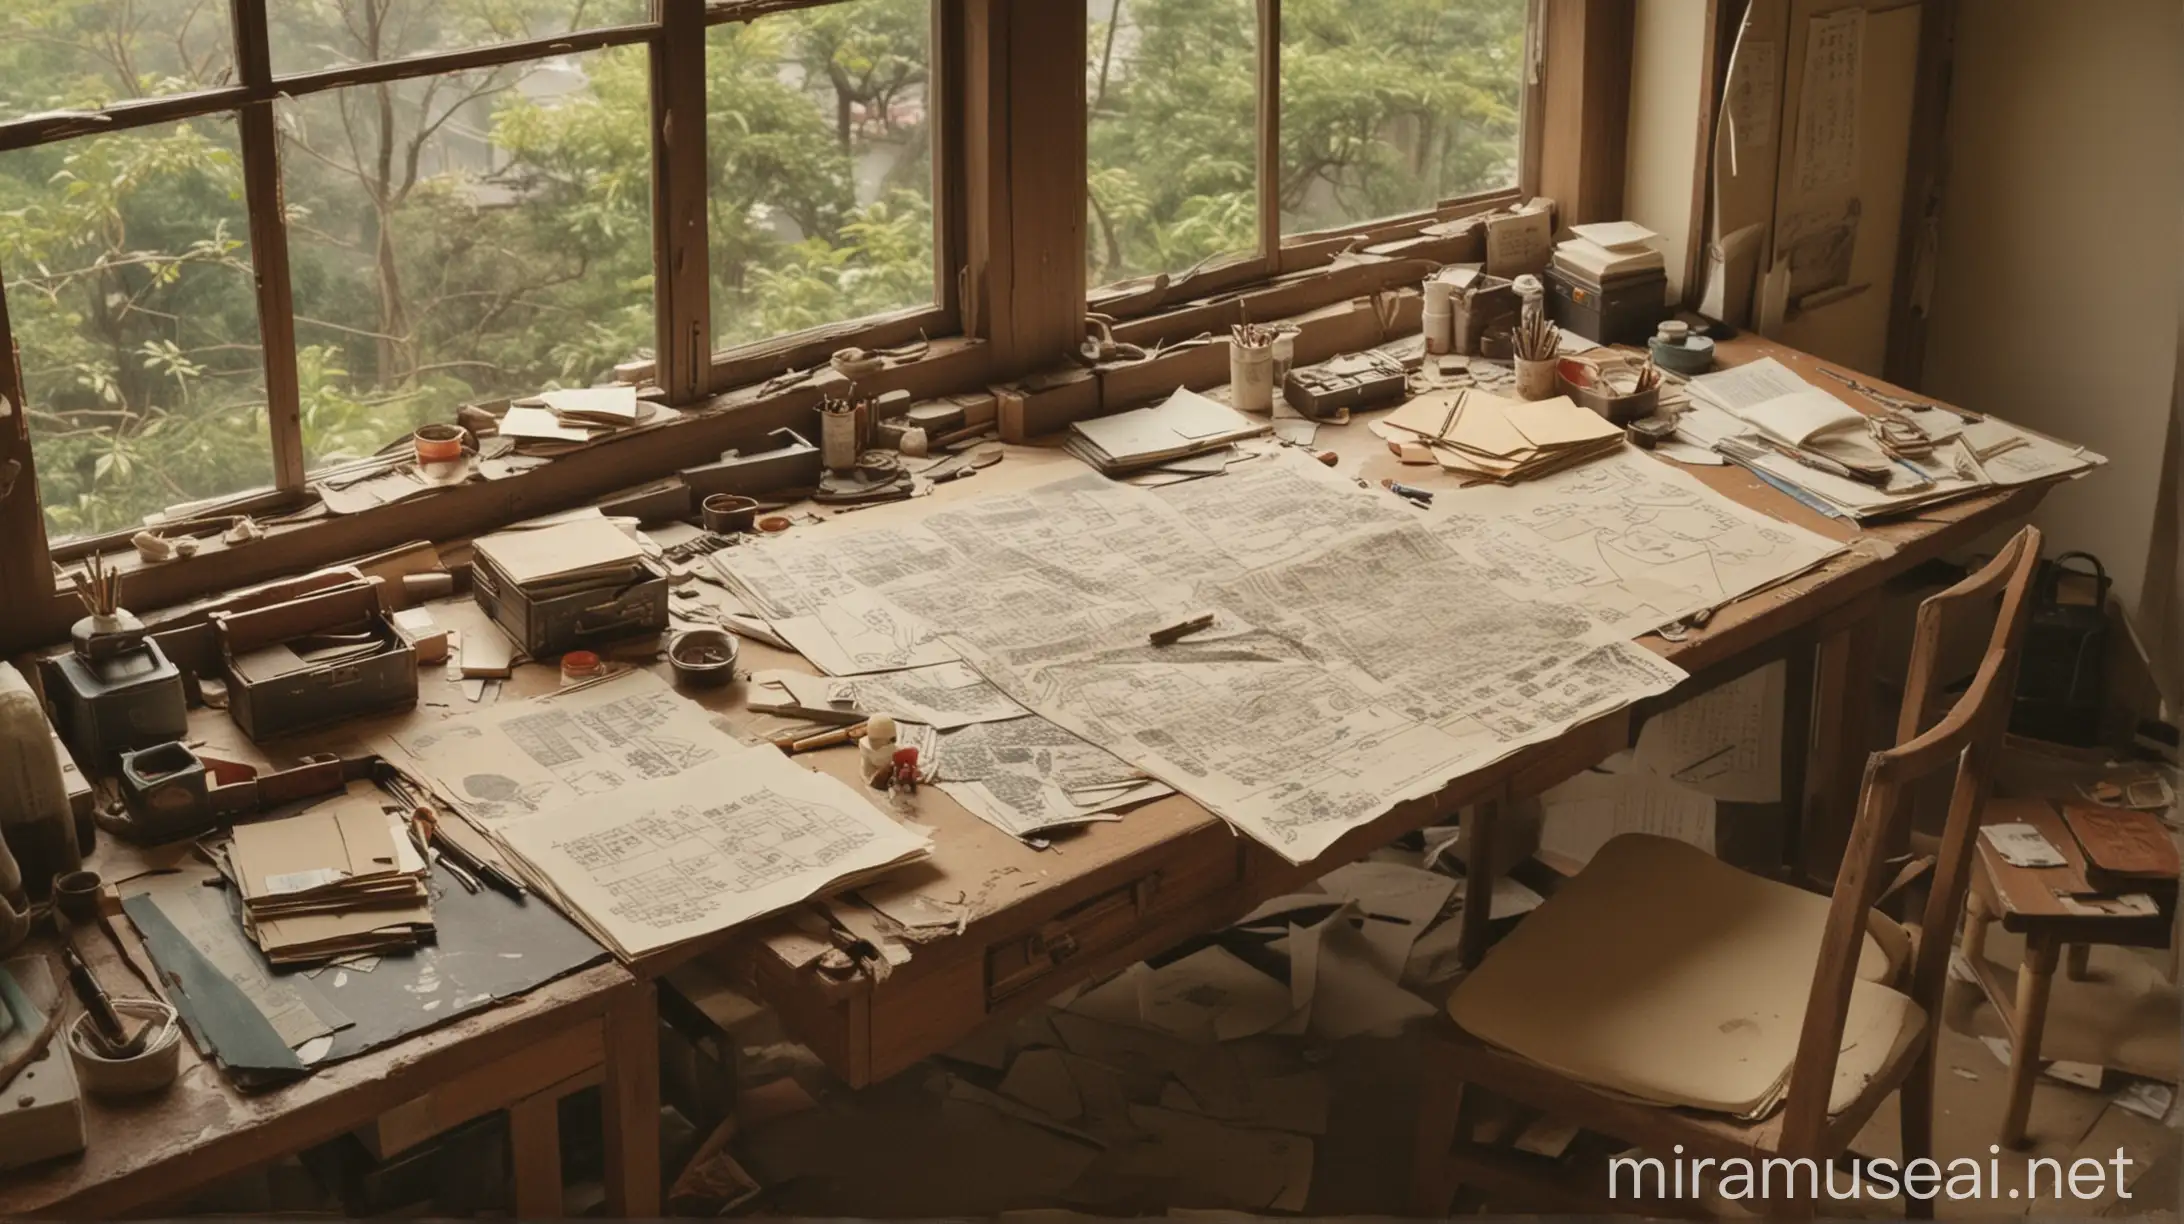 Set in Japan 1950, make a desk that is located near to Japanese house large windows, in the desk there are 4 messy papers with Japanese sketch about innovating a product, along with the 2 ripped papers too, do not forget to make it seems like another person have tried to look for something from the desk, but make it no person at all